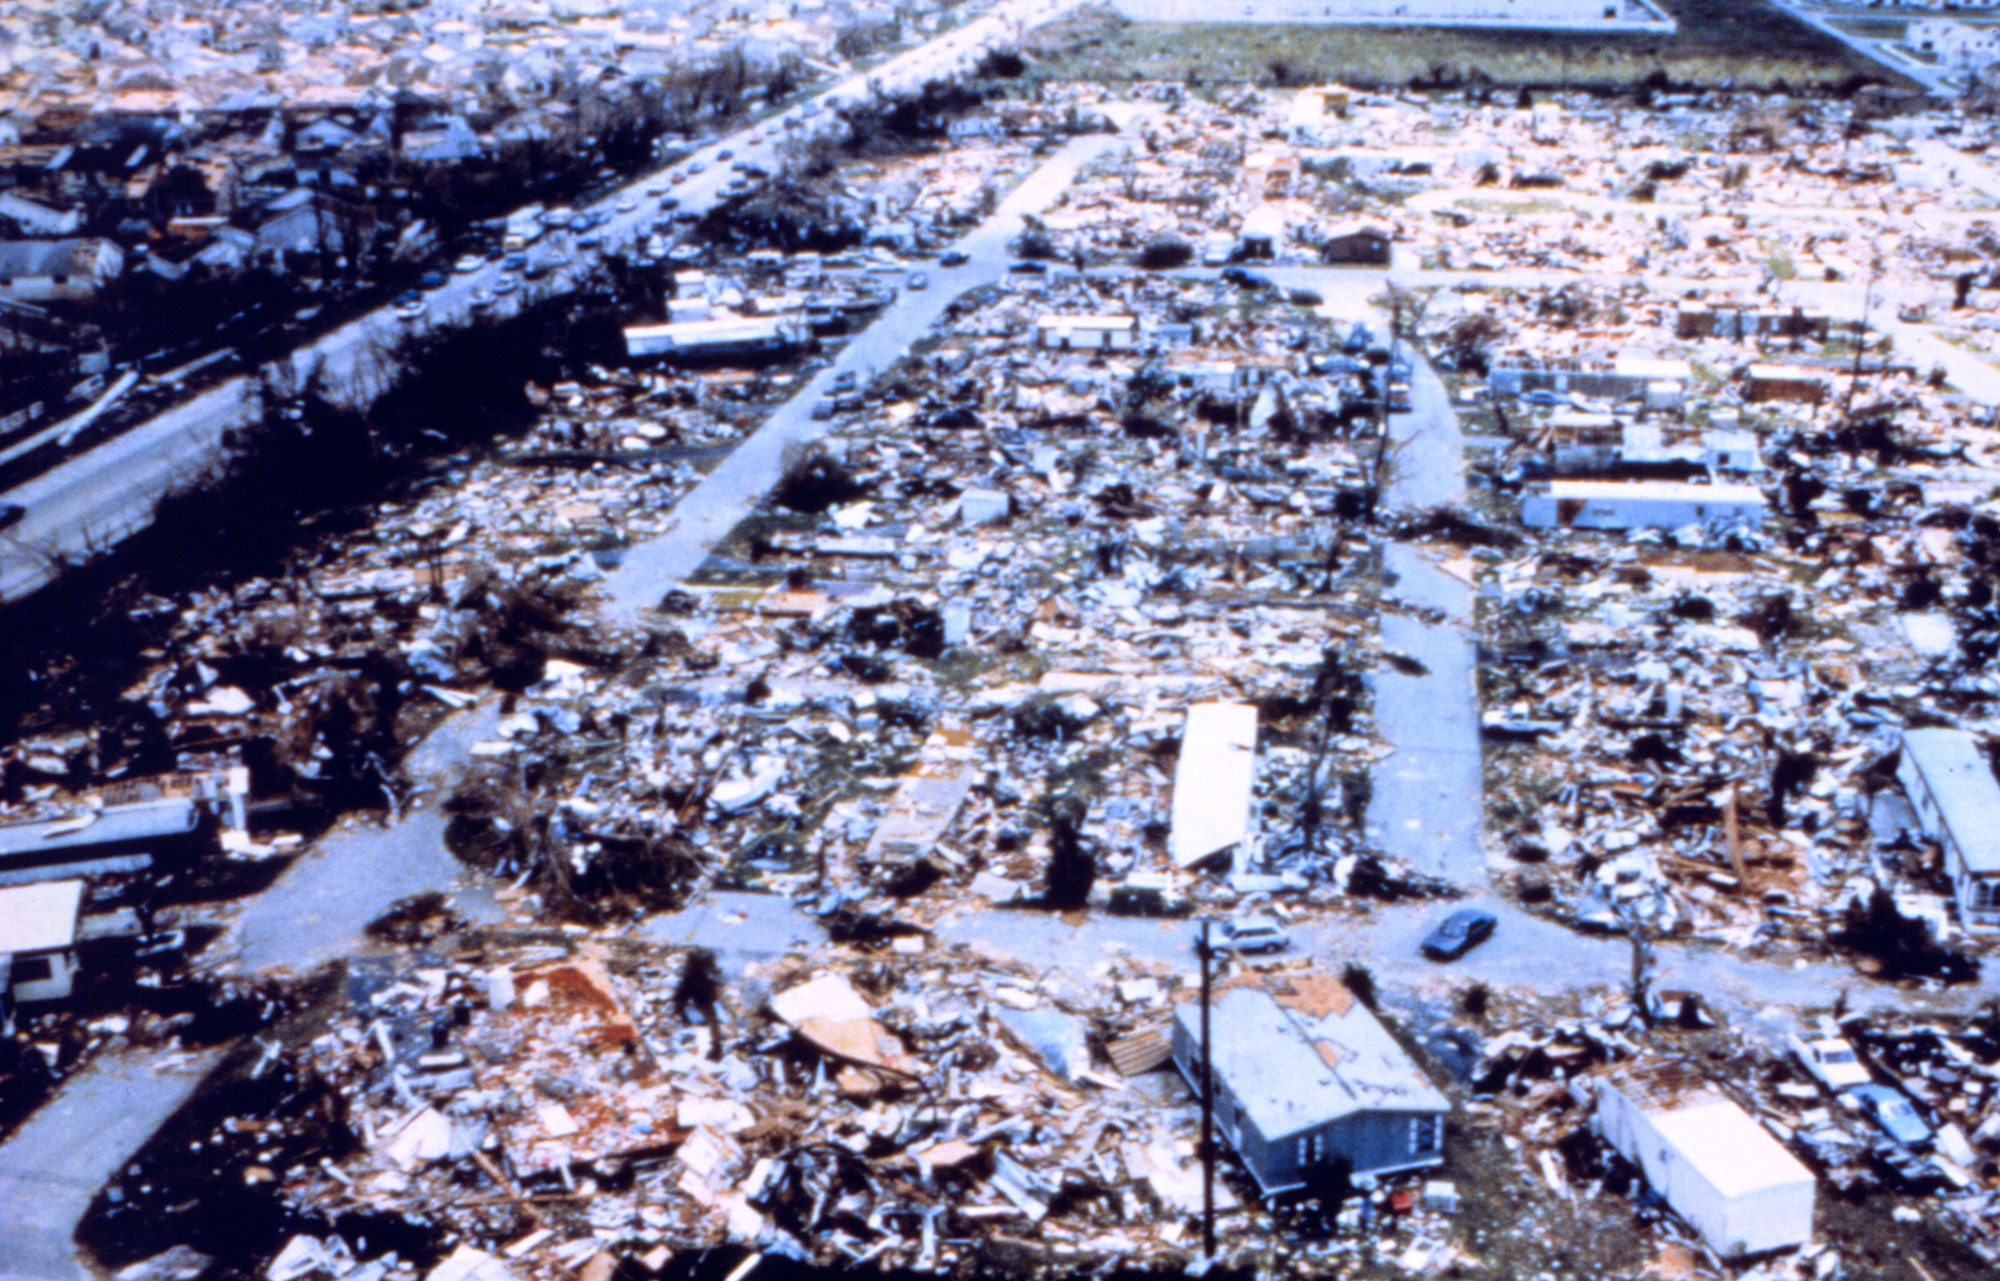 Image of the destruction of a mobile home park in Florida following Hurricane Andrew.